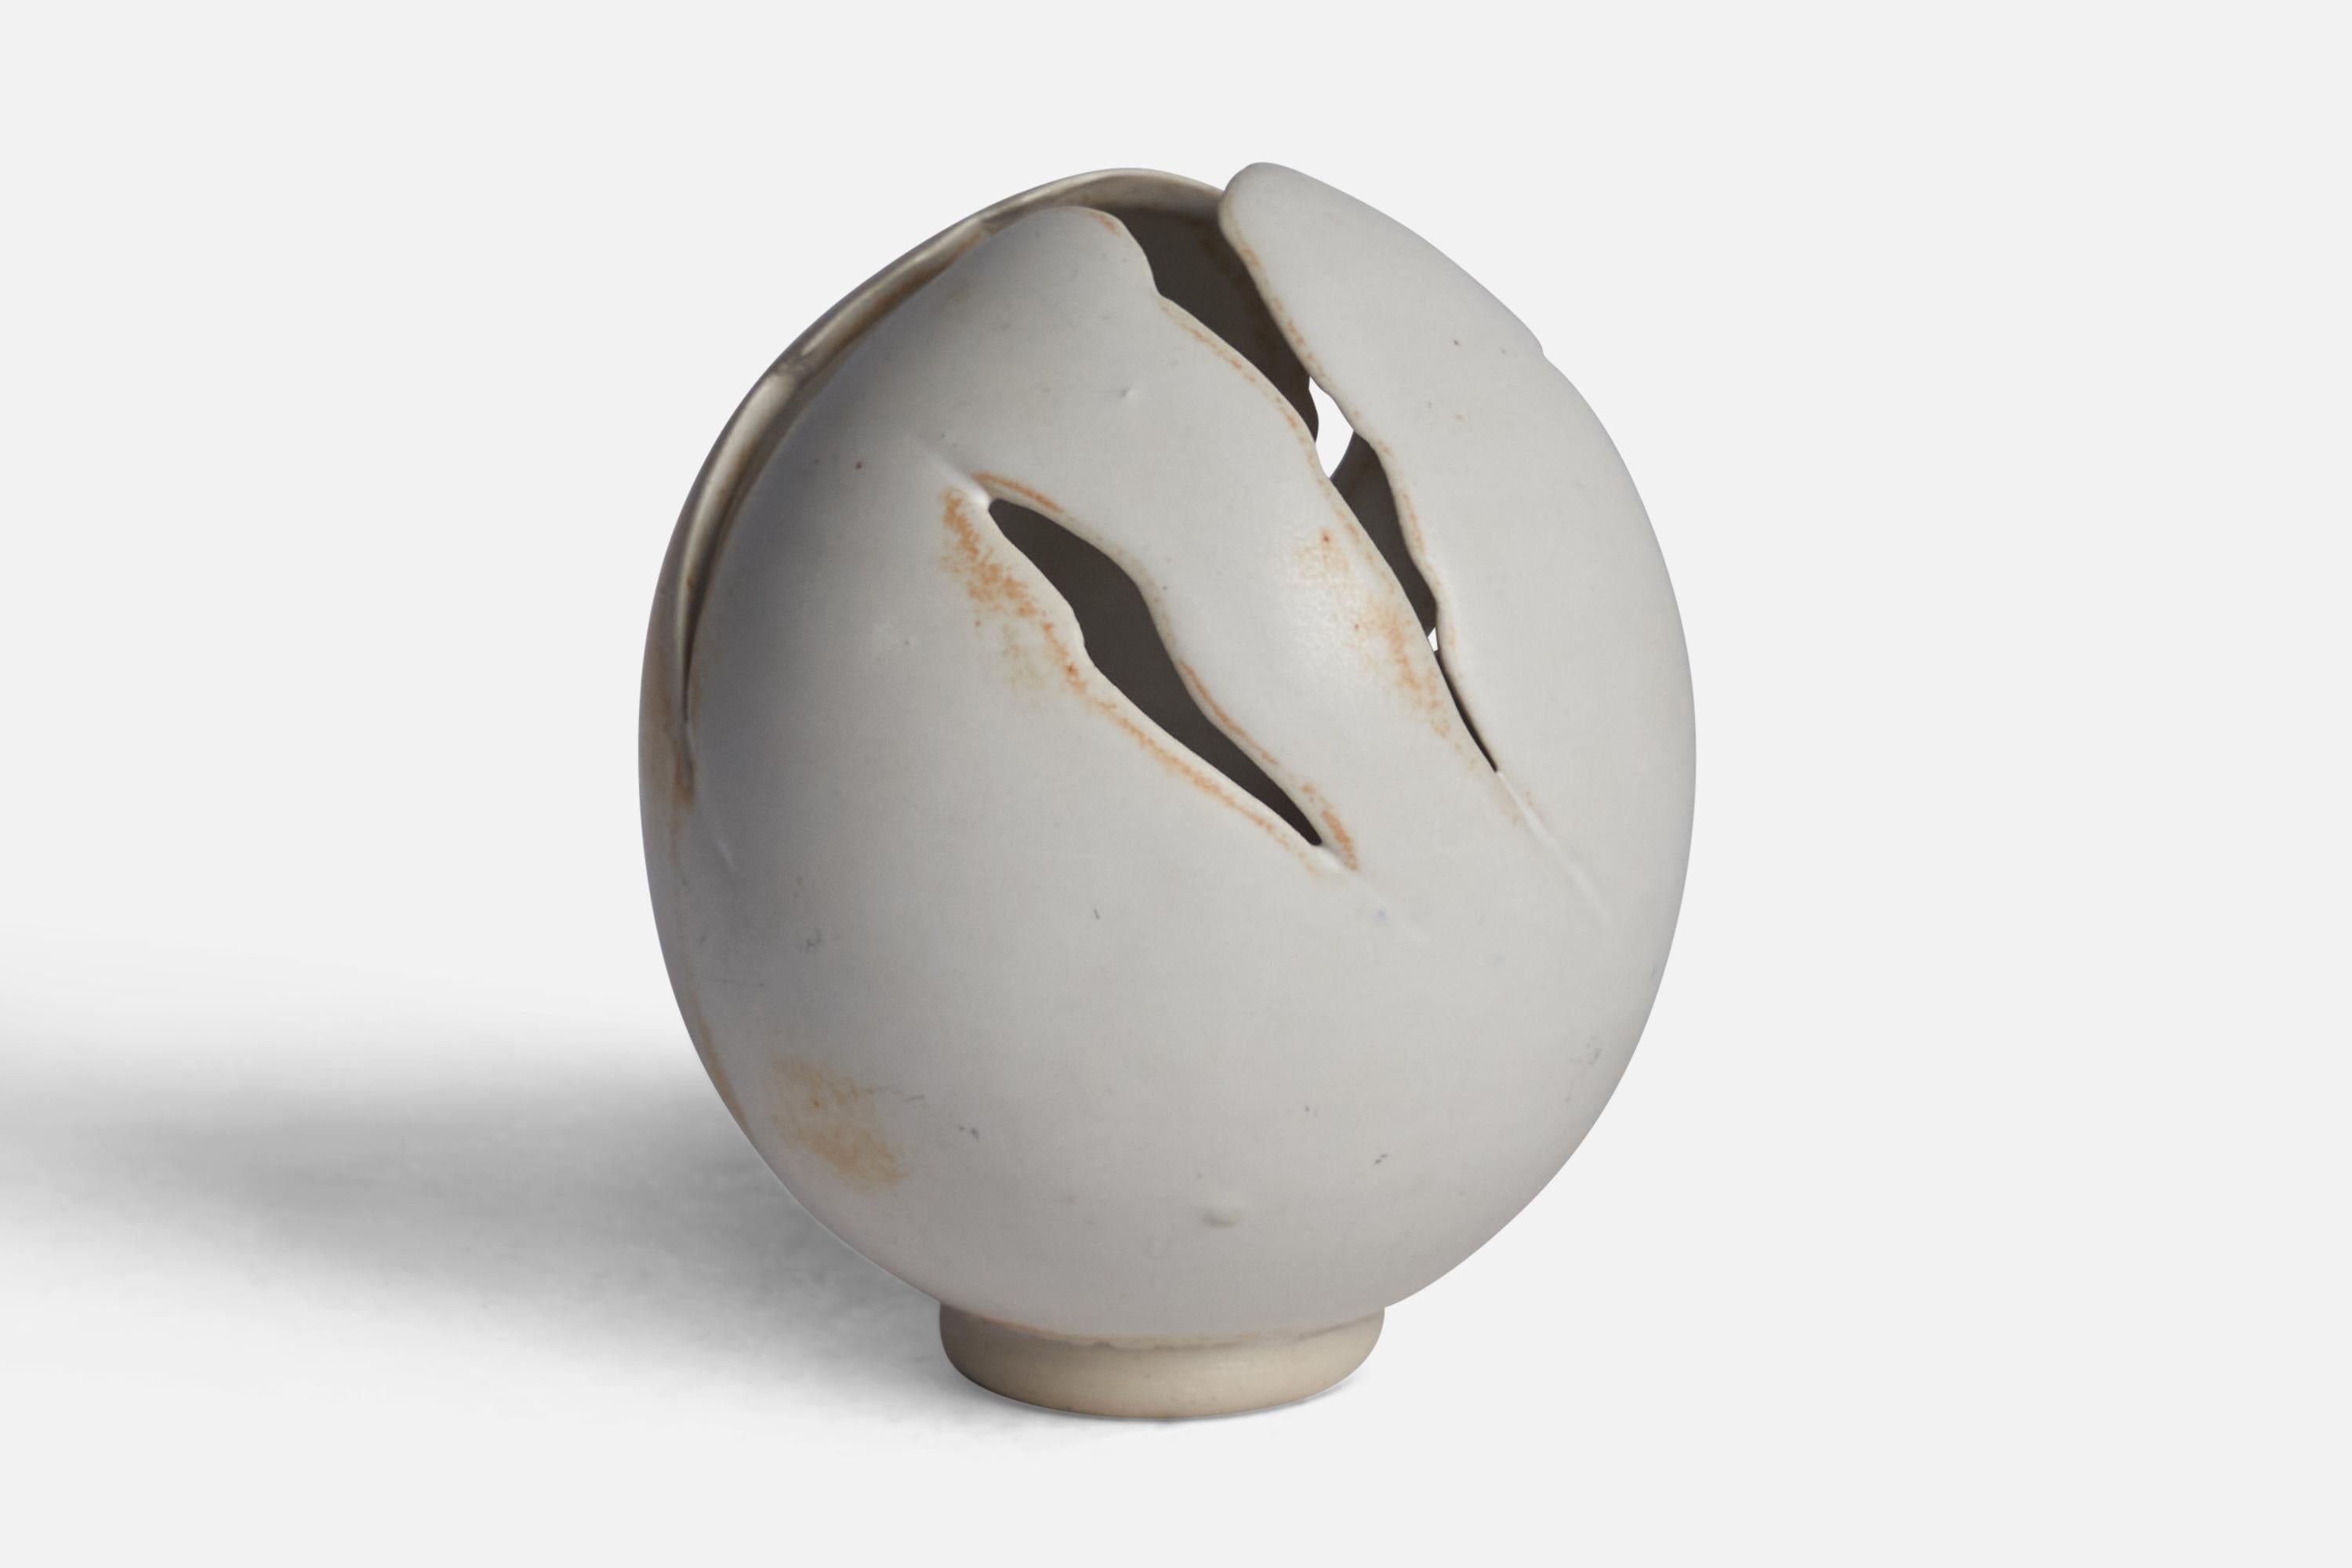 A white-glazed stoneware sculpture designed and produced by Ulf Nordfjell, Sweden, 1987.